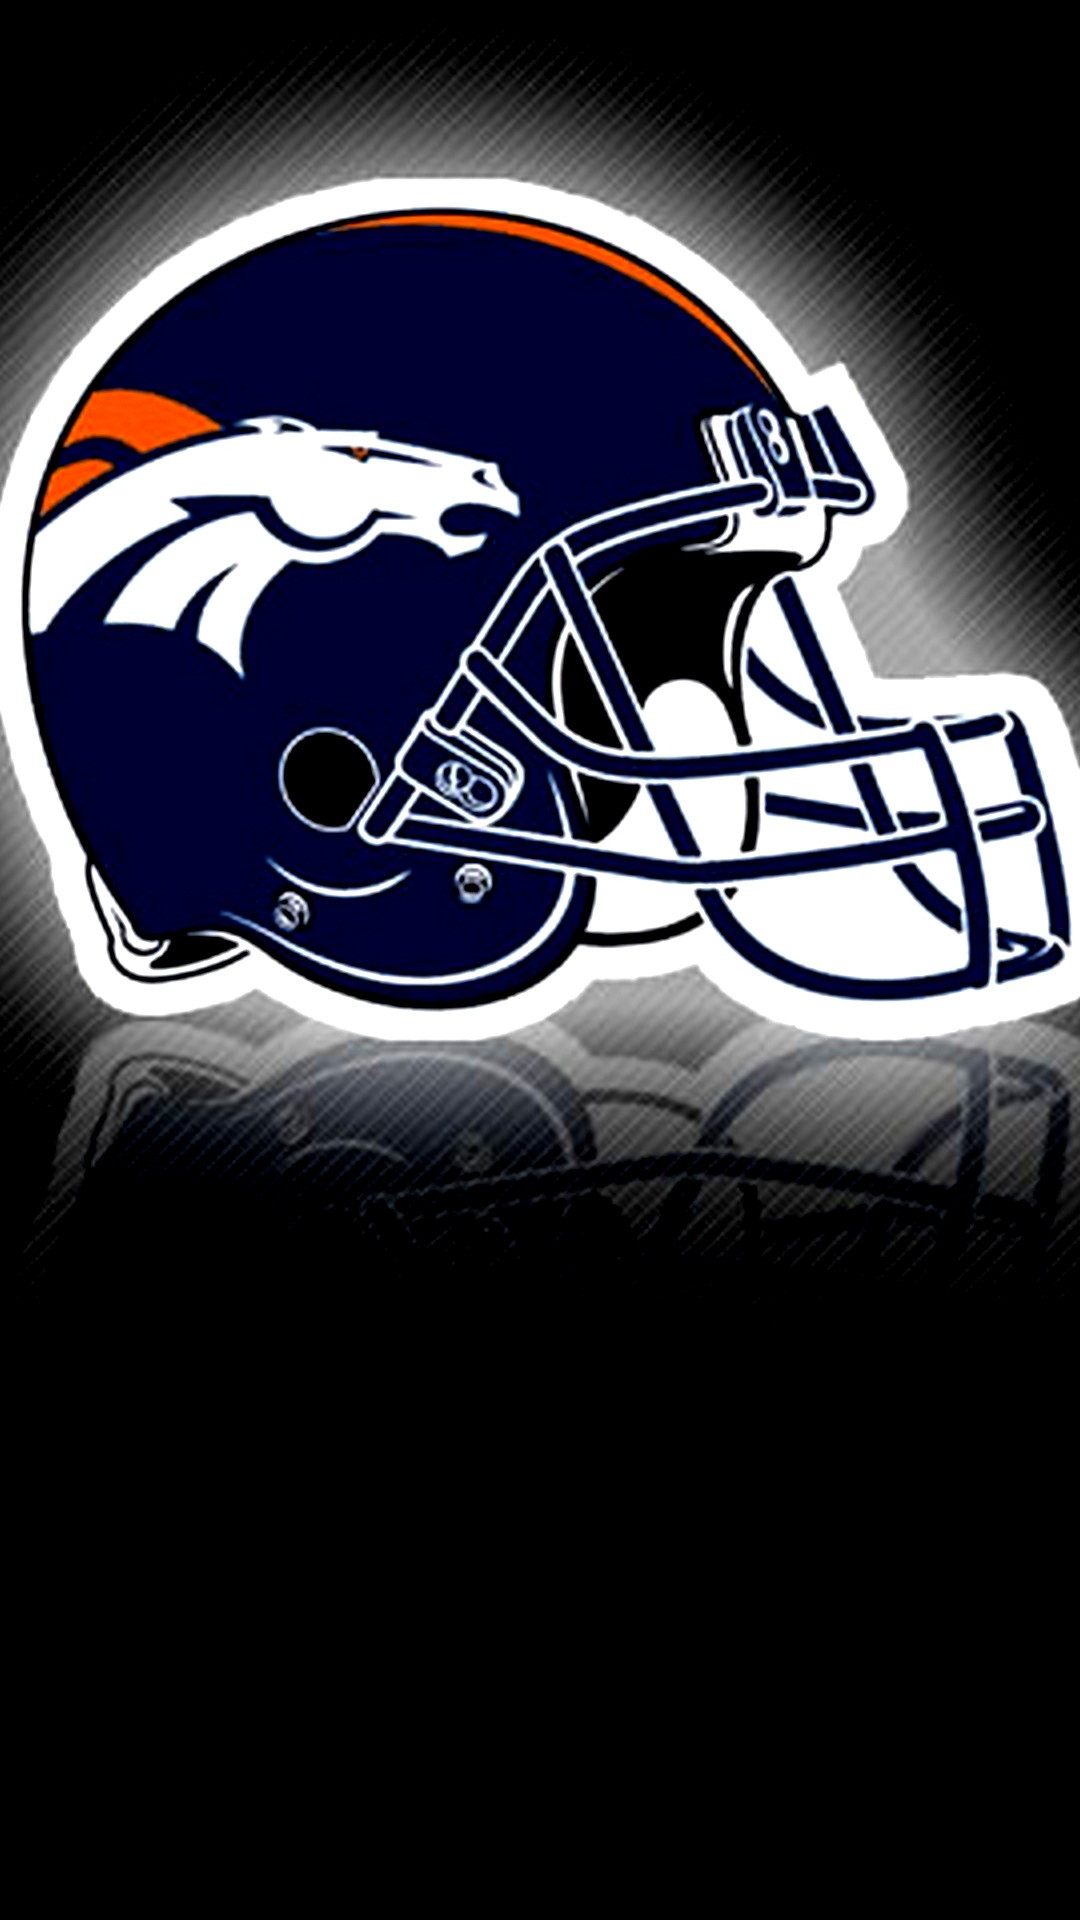 Denver Broncos iPhone 7 Plus Wallpaper With high-resolution 1080X1920 pixel. You can use this wallpaper for your Mac or Windows Desktop Background, iPhone, Android or Tablet and another Smartphone device